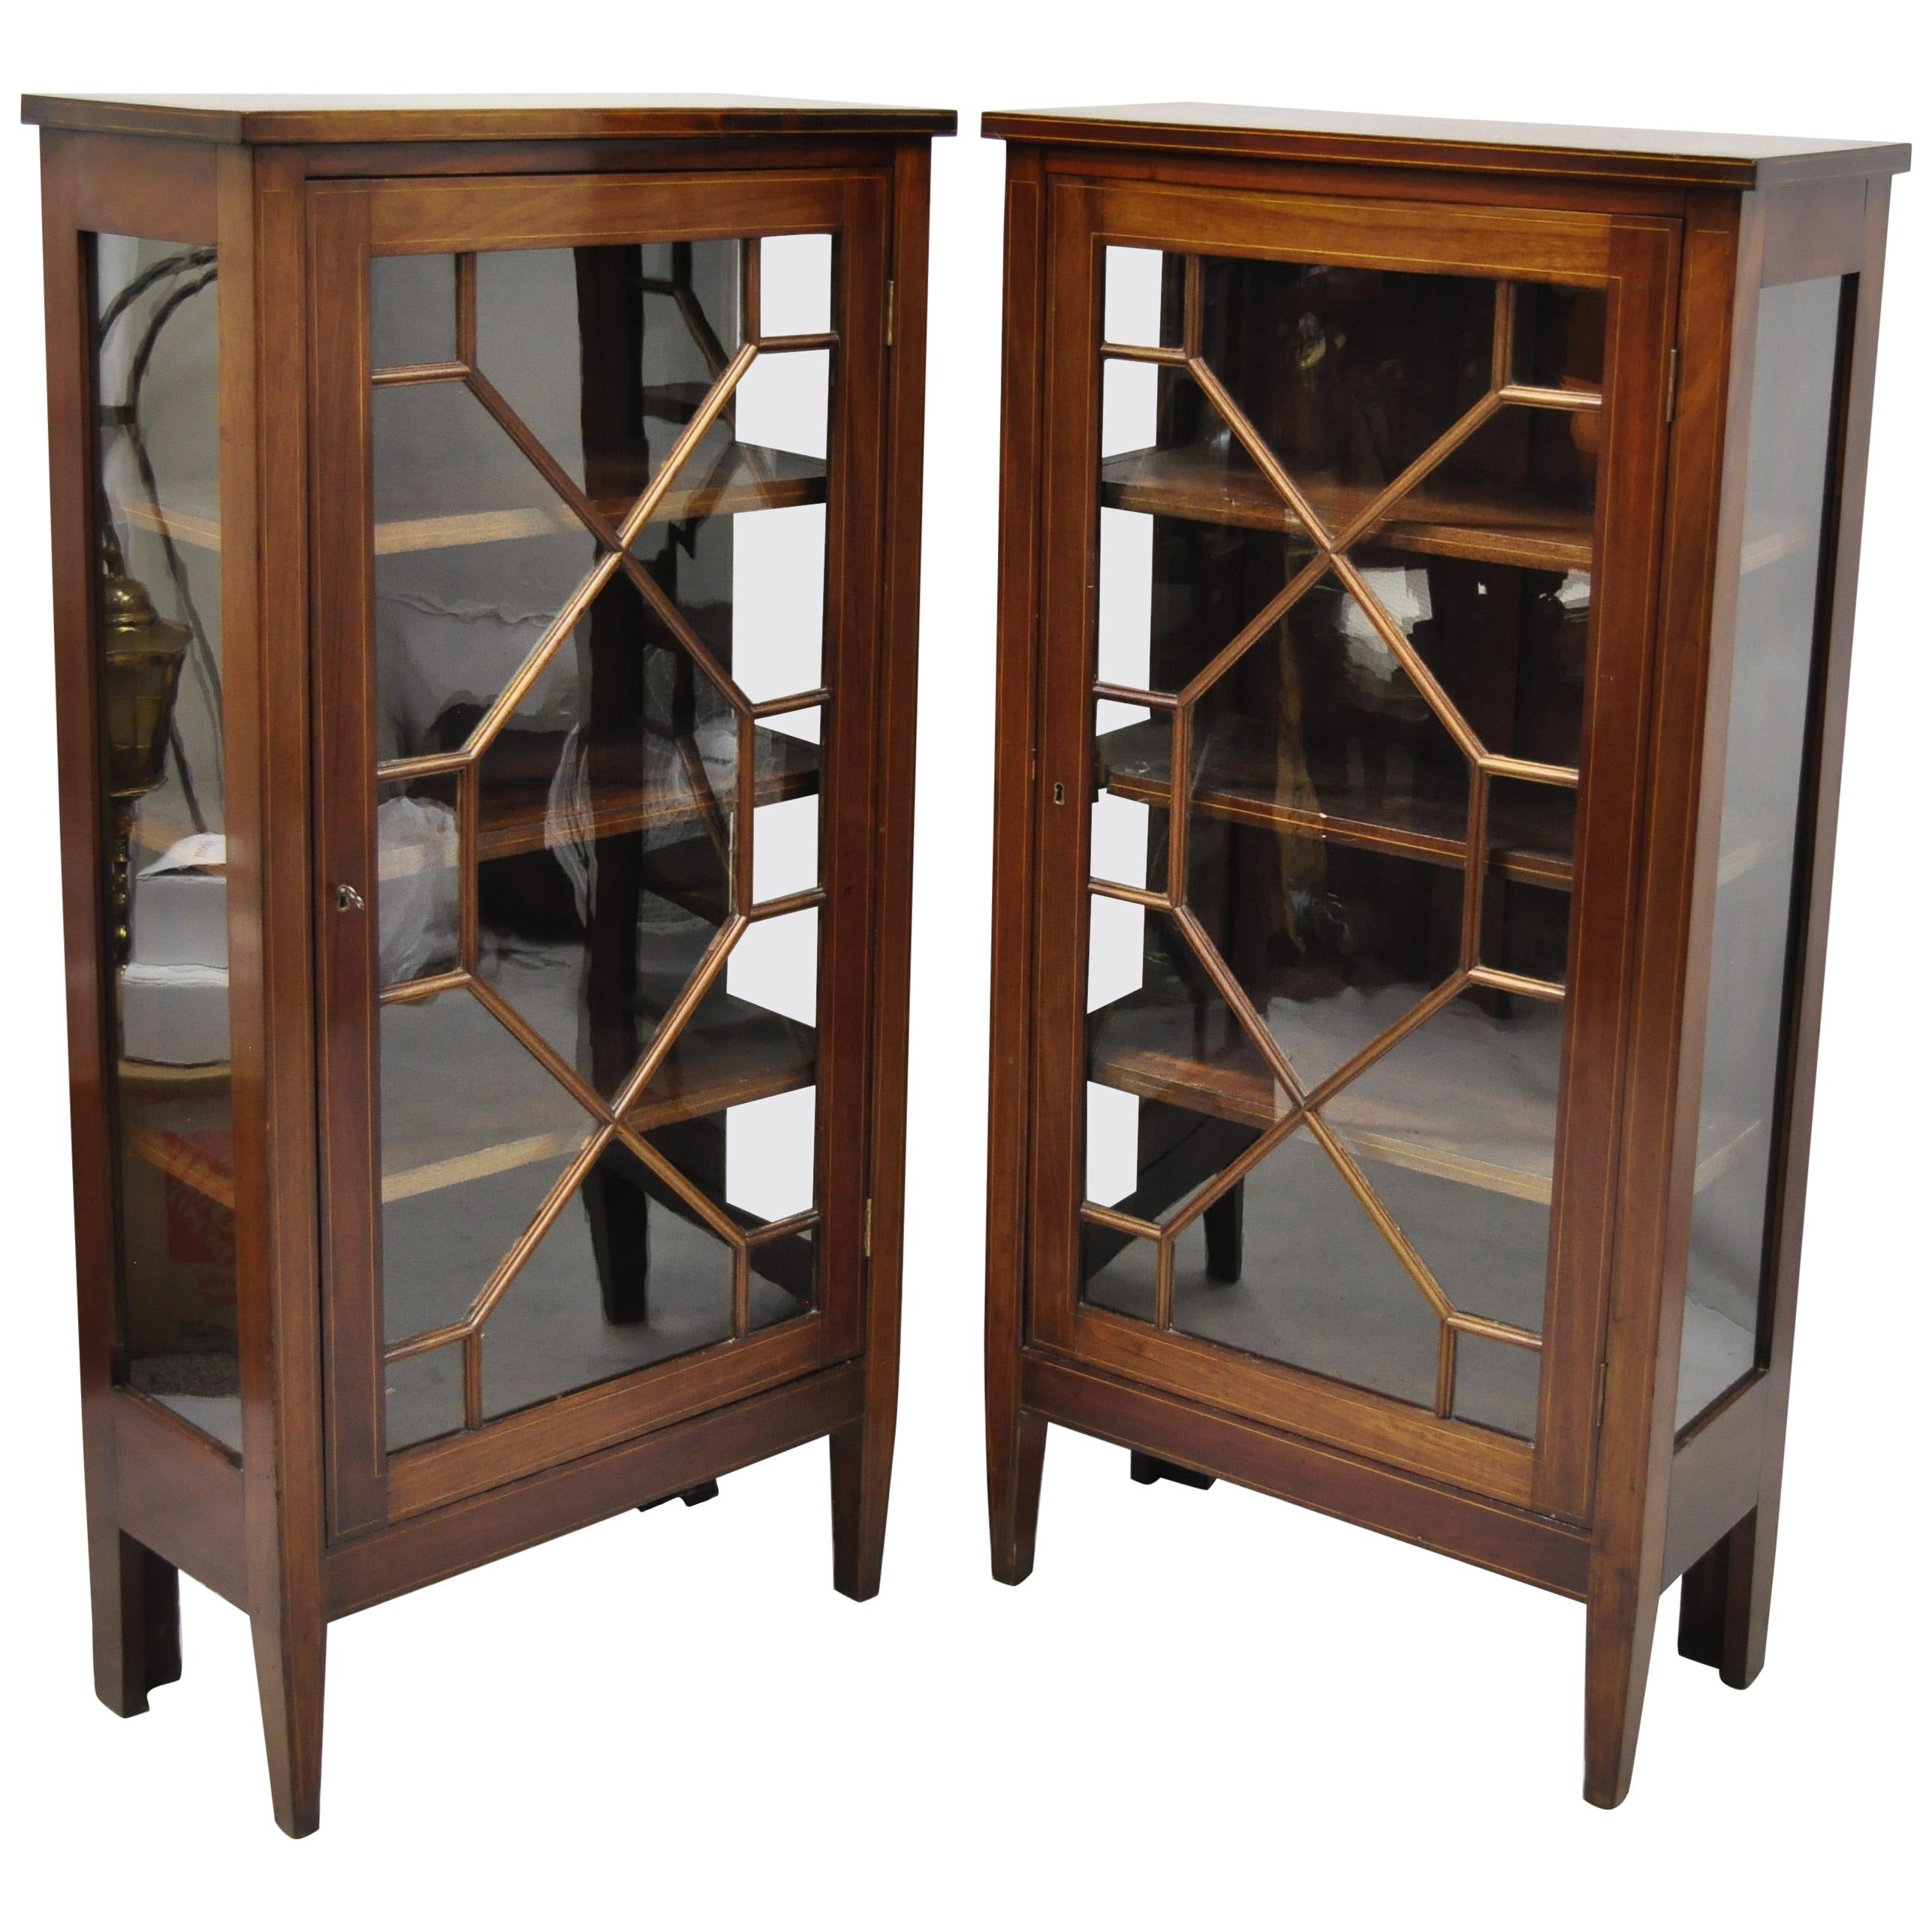 Pair of Crotch Mahogany Inlaid Edwardian Glass Display Cabinet Curio Bookcases